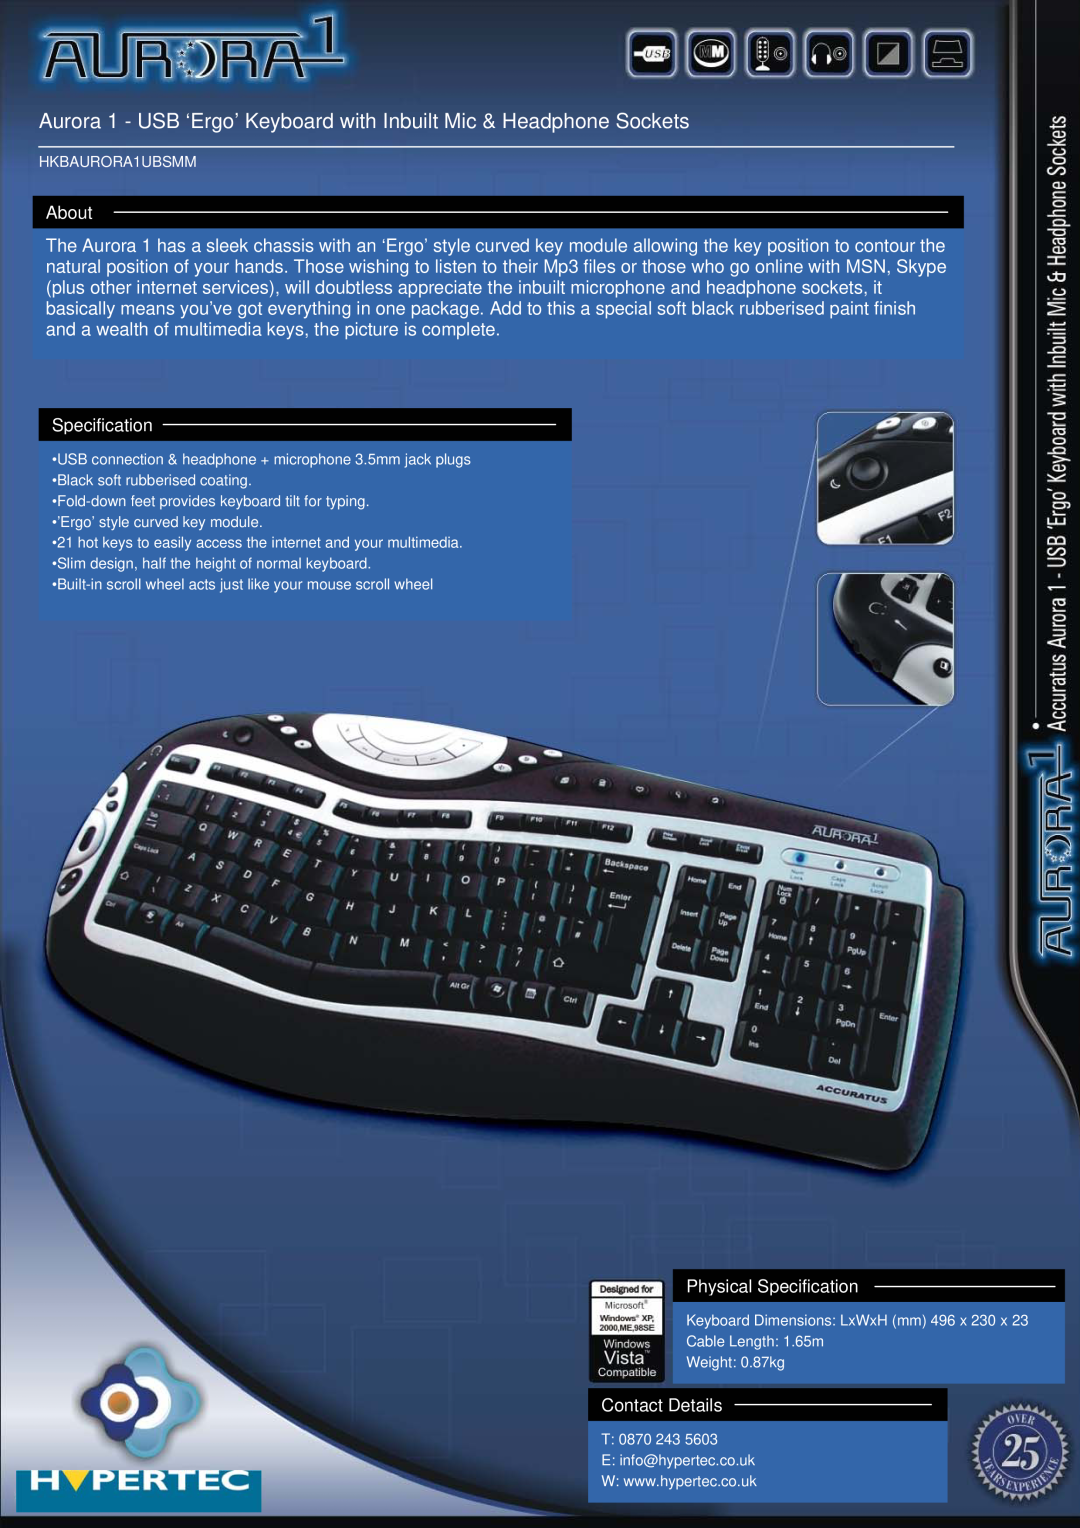 Hypertec dimensions Aurora 1 - USB ‘Ergo’ Keyboard with Inbuilt Mic & Headphone Sockets, About, Specification 